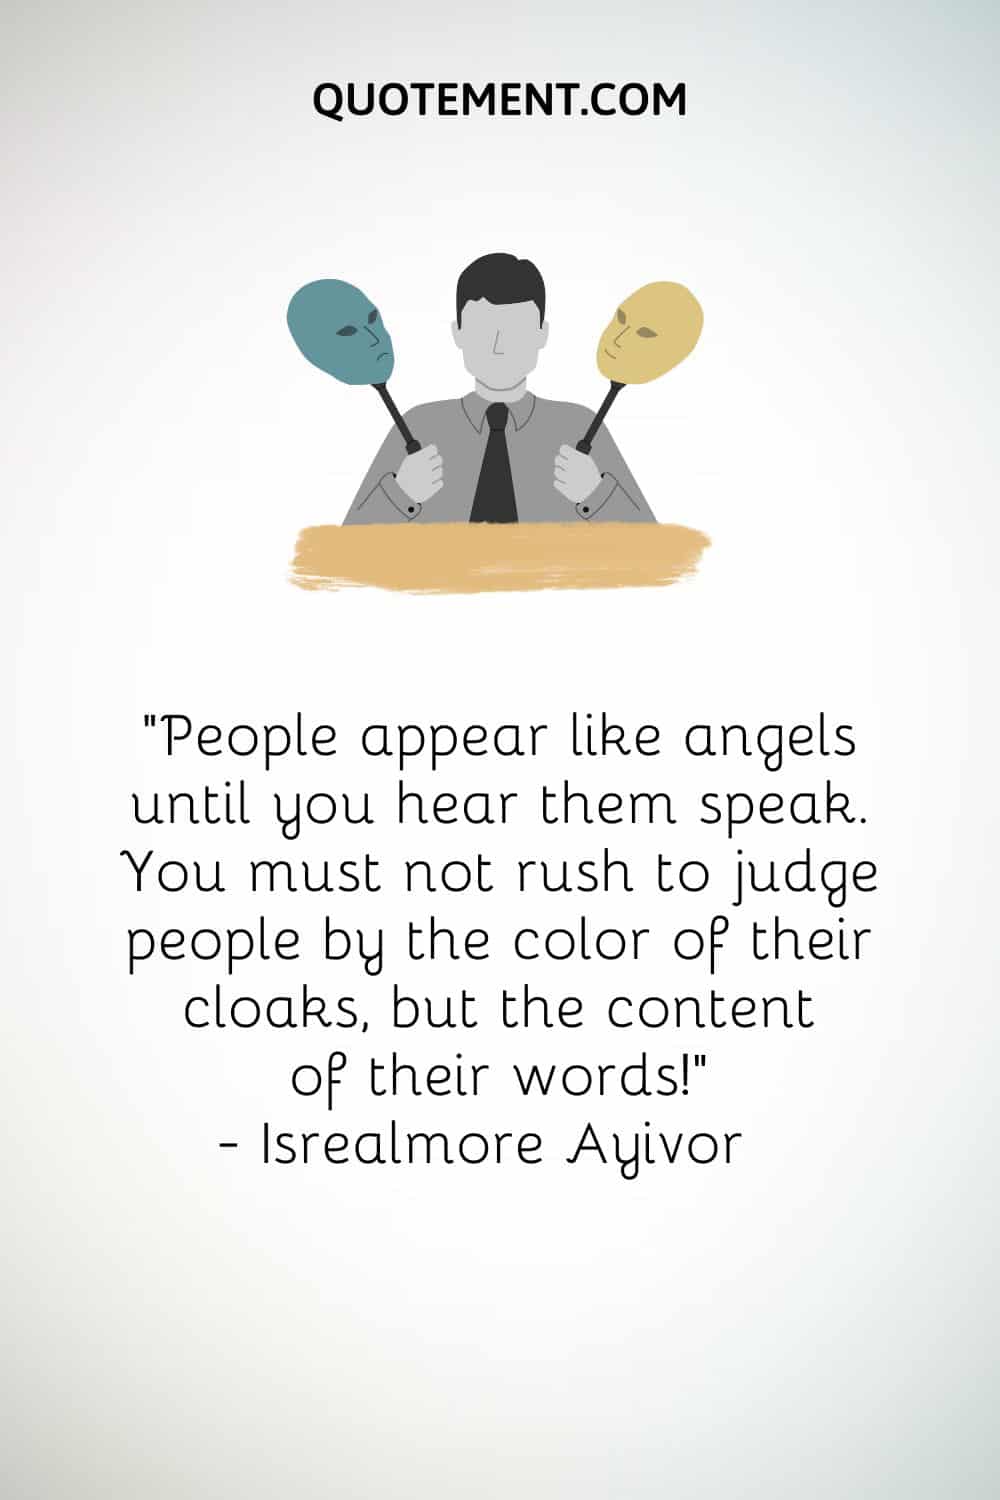 “People appear like angels until you hear them speak. You must not rush to judge people by the color of their cloaks, but the content of their words!” — Isrealmore Ayivor